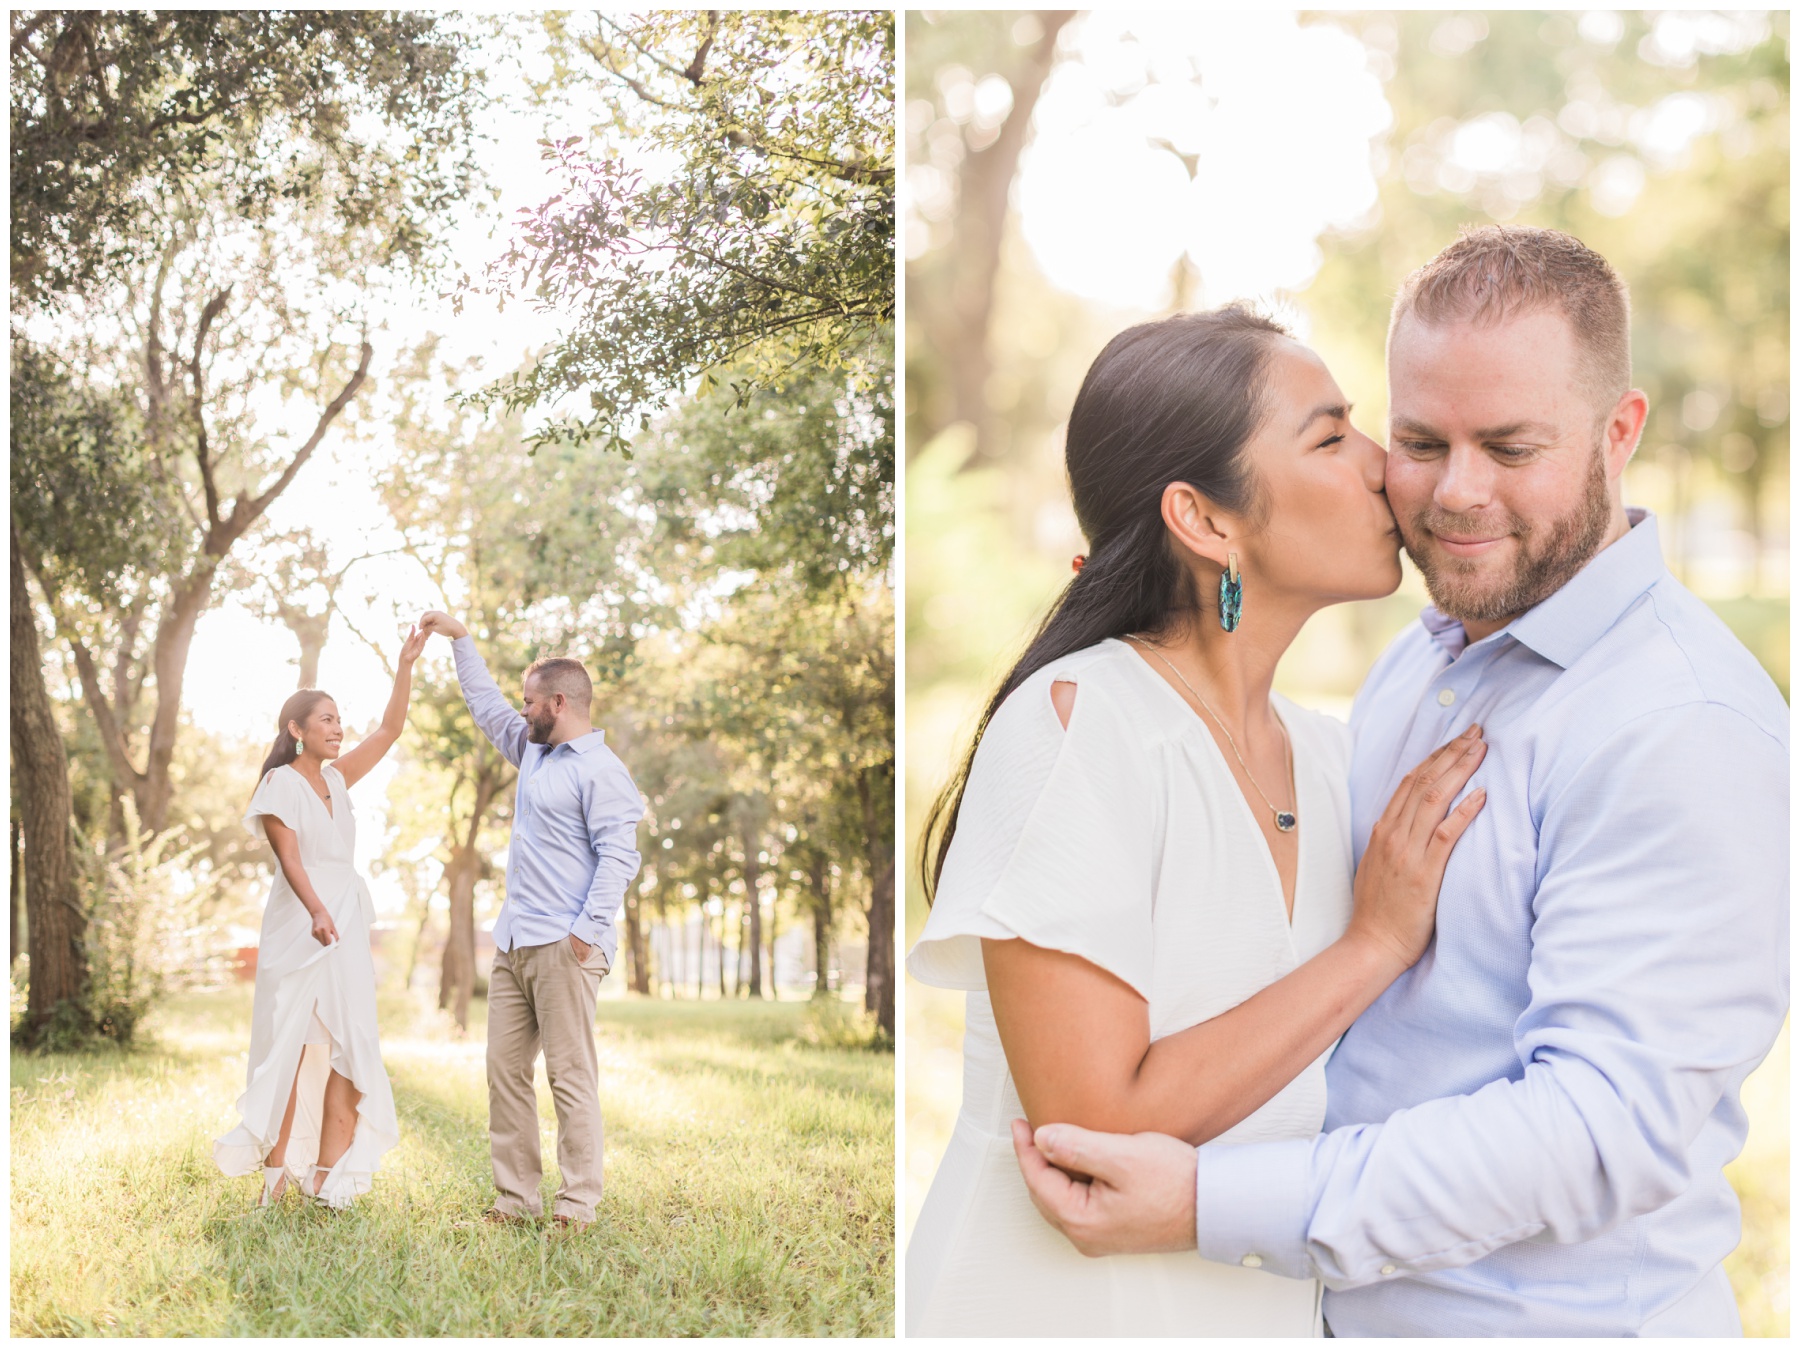 Bride wearing a white dress and turquoise jewelry for her engagement session